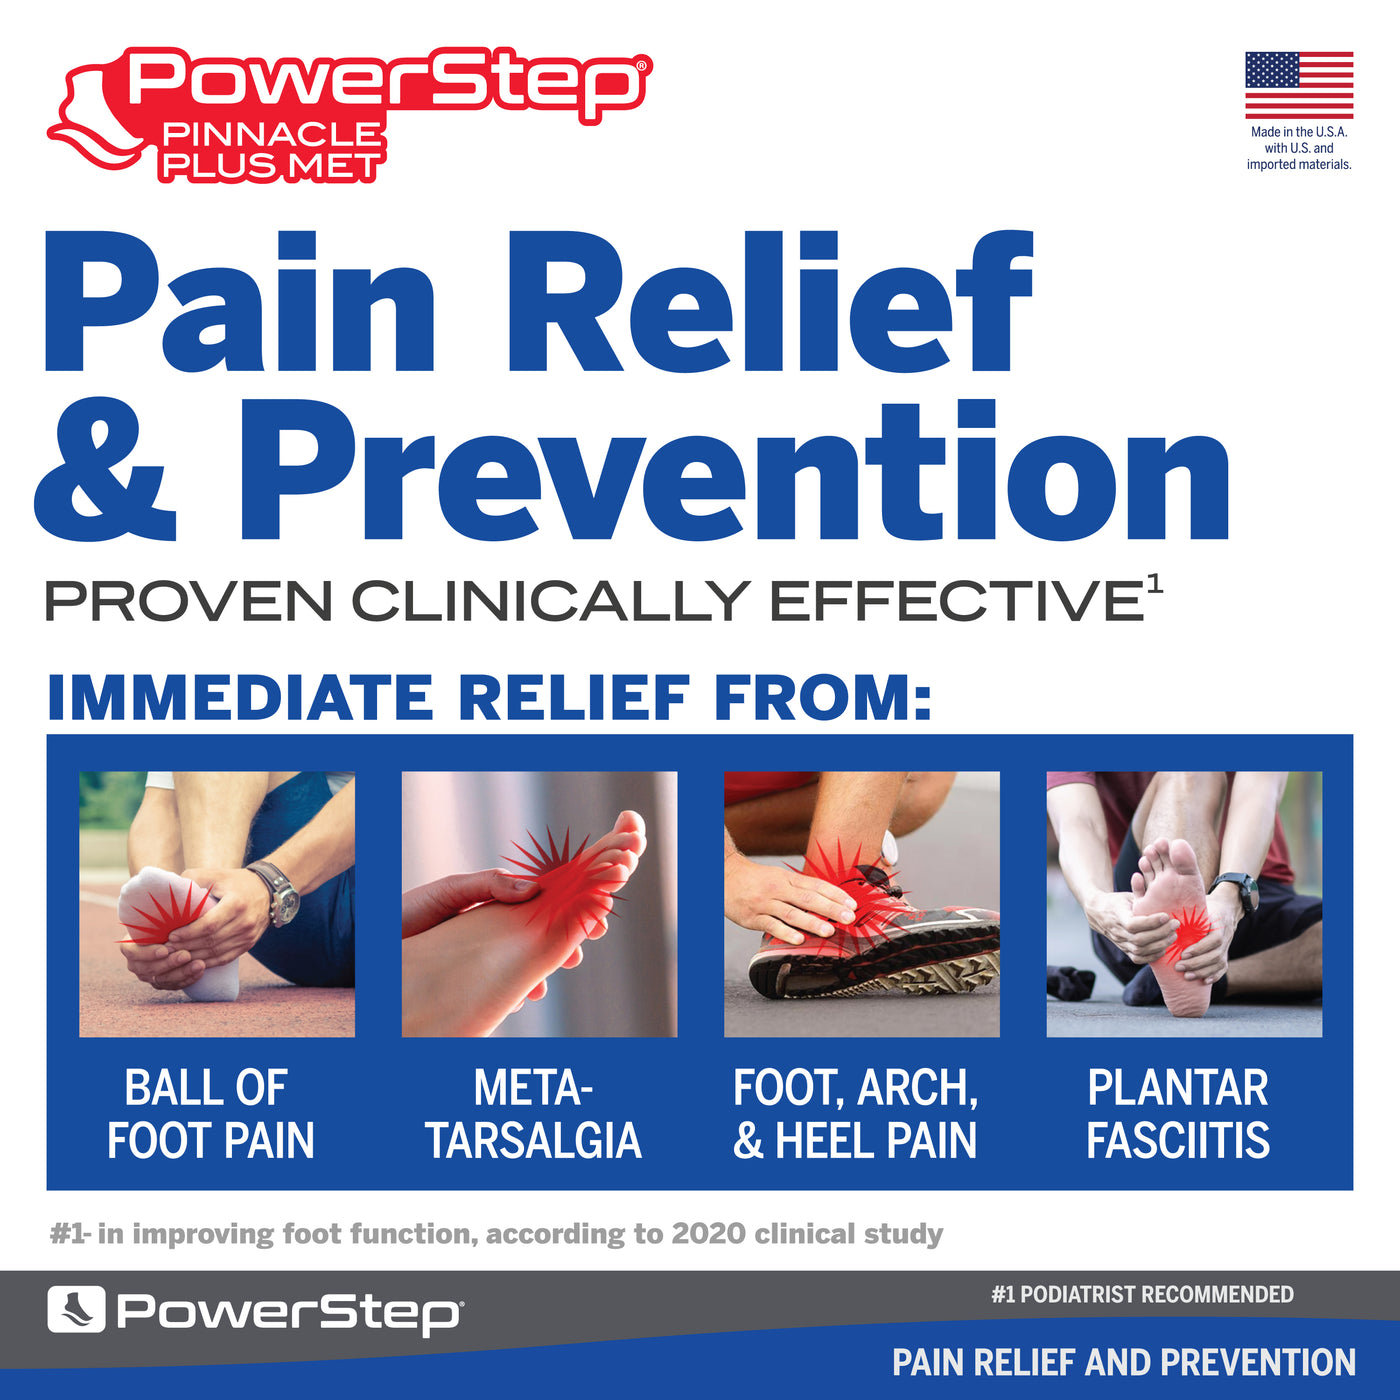 PowerStep Pinnacle Plus Met Orthotic Shoe Insoles, Made in the USA with US and imported materials, pain relief and prevention, proven clinically effective for immediate relief from ball of foot pain, metatarsalgia, foot, arch and heel pain, plantar fasciitis, number one in improving foot function according to 2020 clinical study, number one podiatrist recommended shoe orthotic for arch support, women’s shoe inserts, men’s orthotic shoe insoles, unisex orthotic arch support insoles